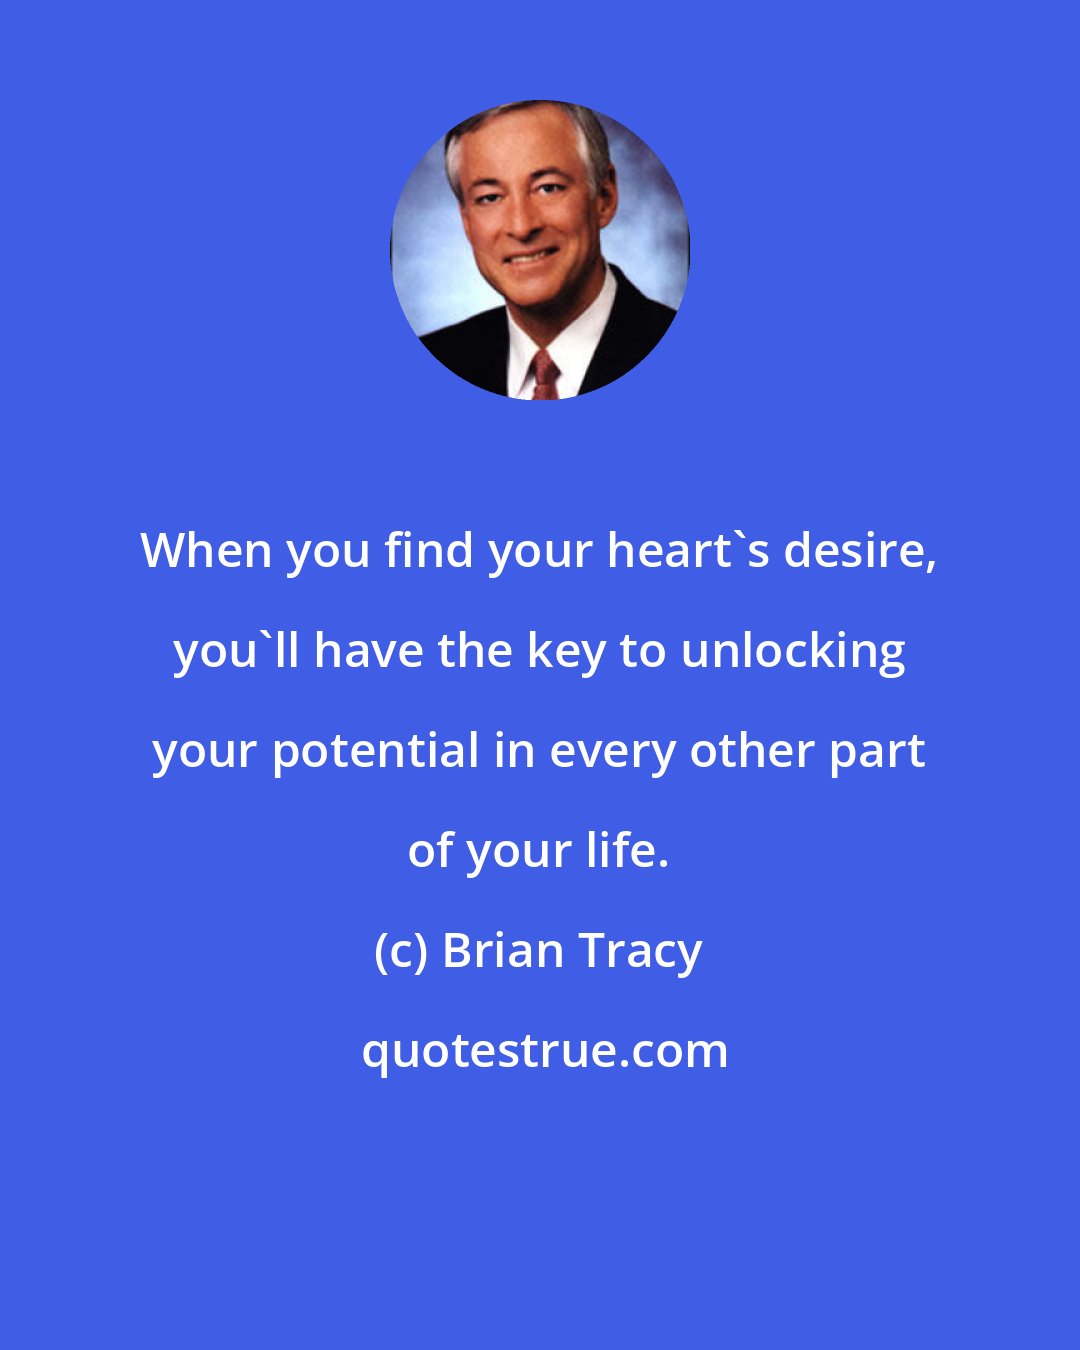 Brian Tracy: When you find your heart's desire, you'll have the key to unlocking your potential in every other part of your life.